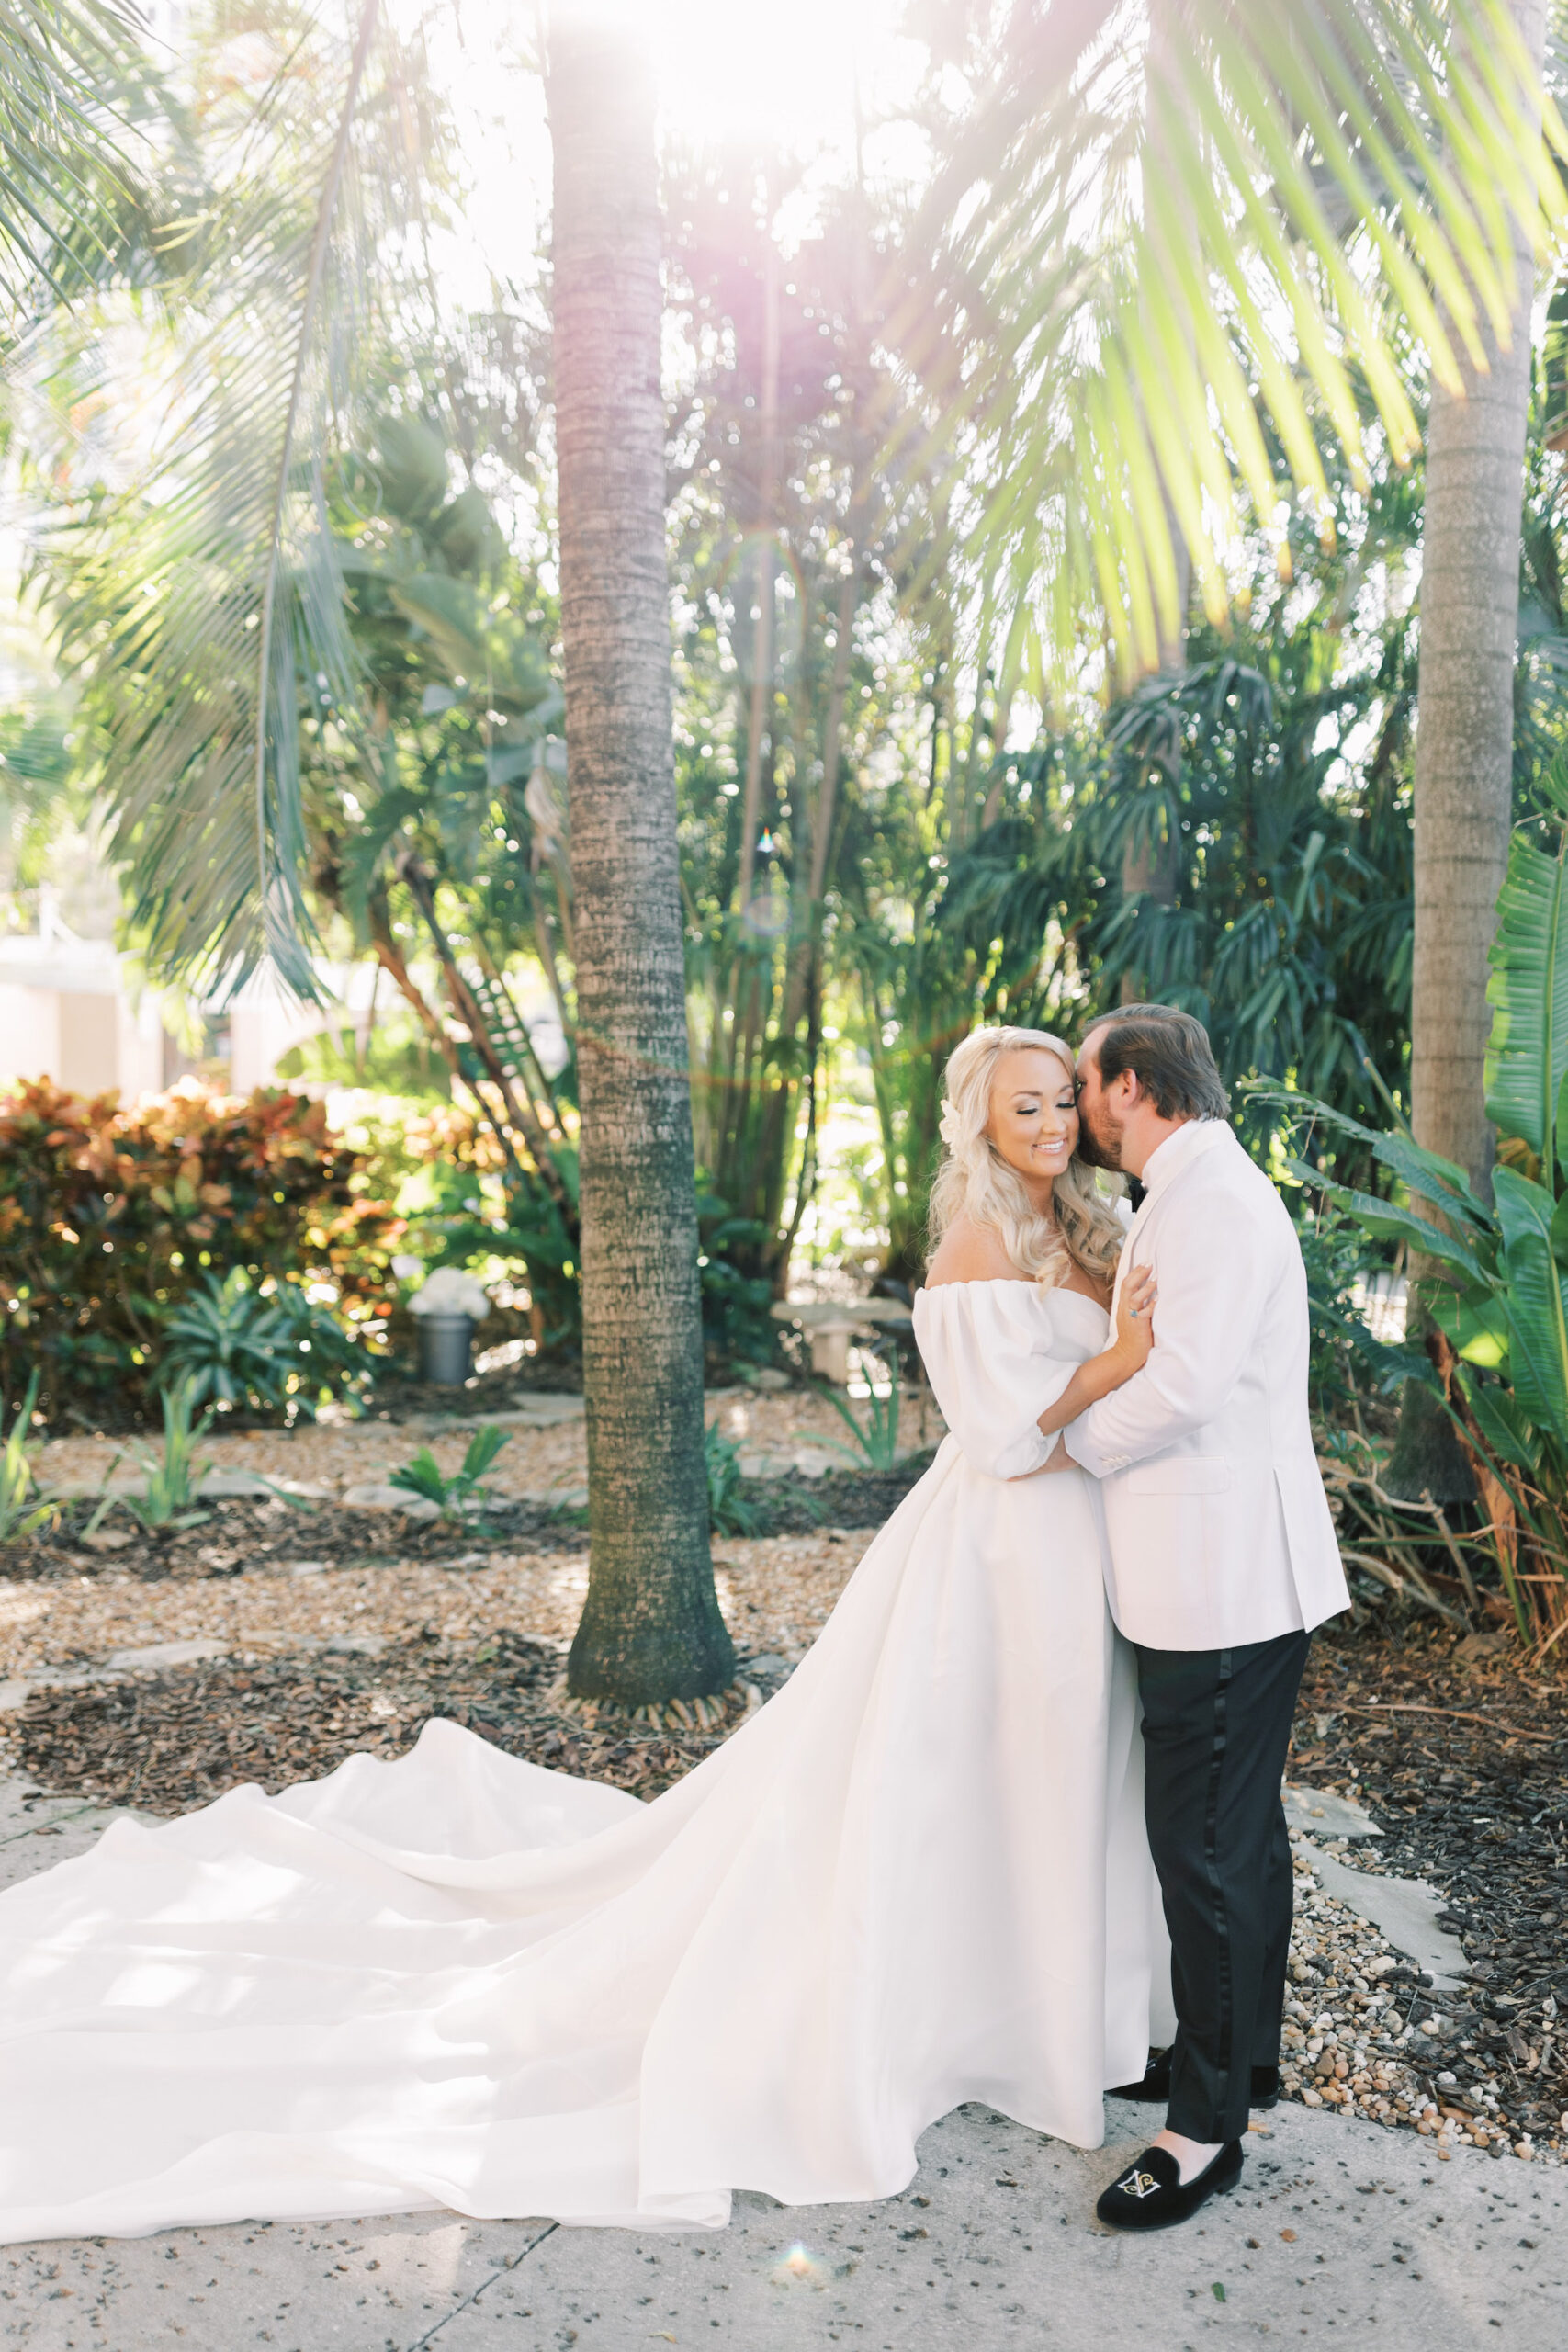 White Off-The-Shoulder Poof Sleeve A-Line Wedding Dress Ideas | White and Black Tuxedo Black Tie Inspiration | Tampa Bay Planner Parties A' La Carte